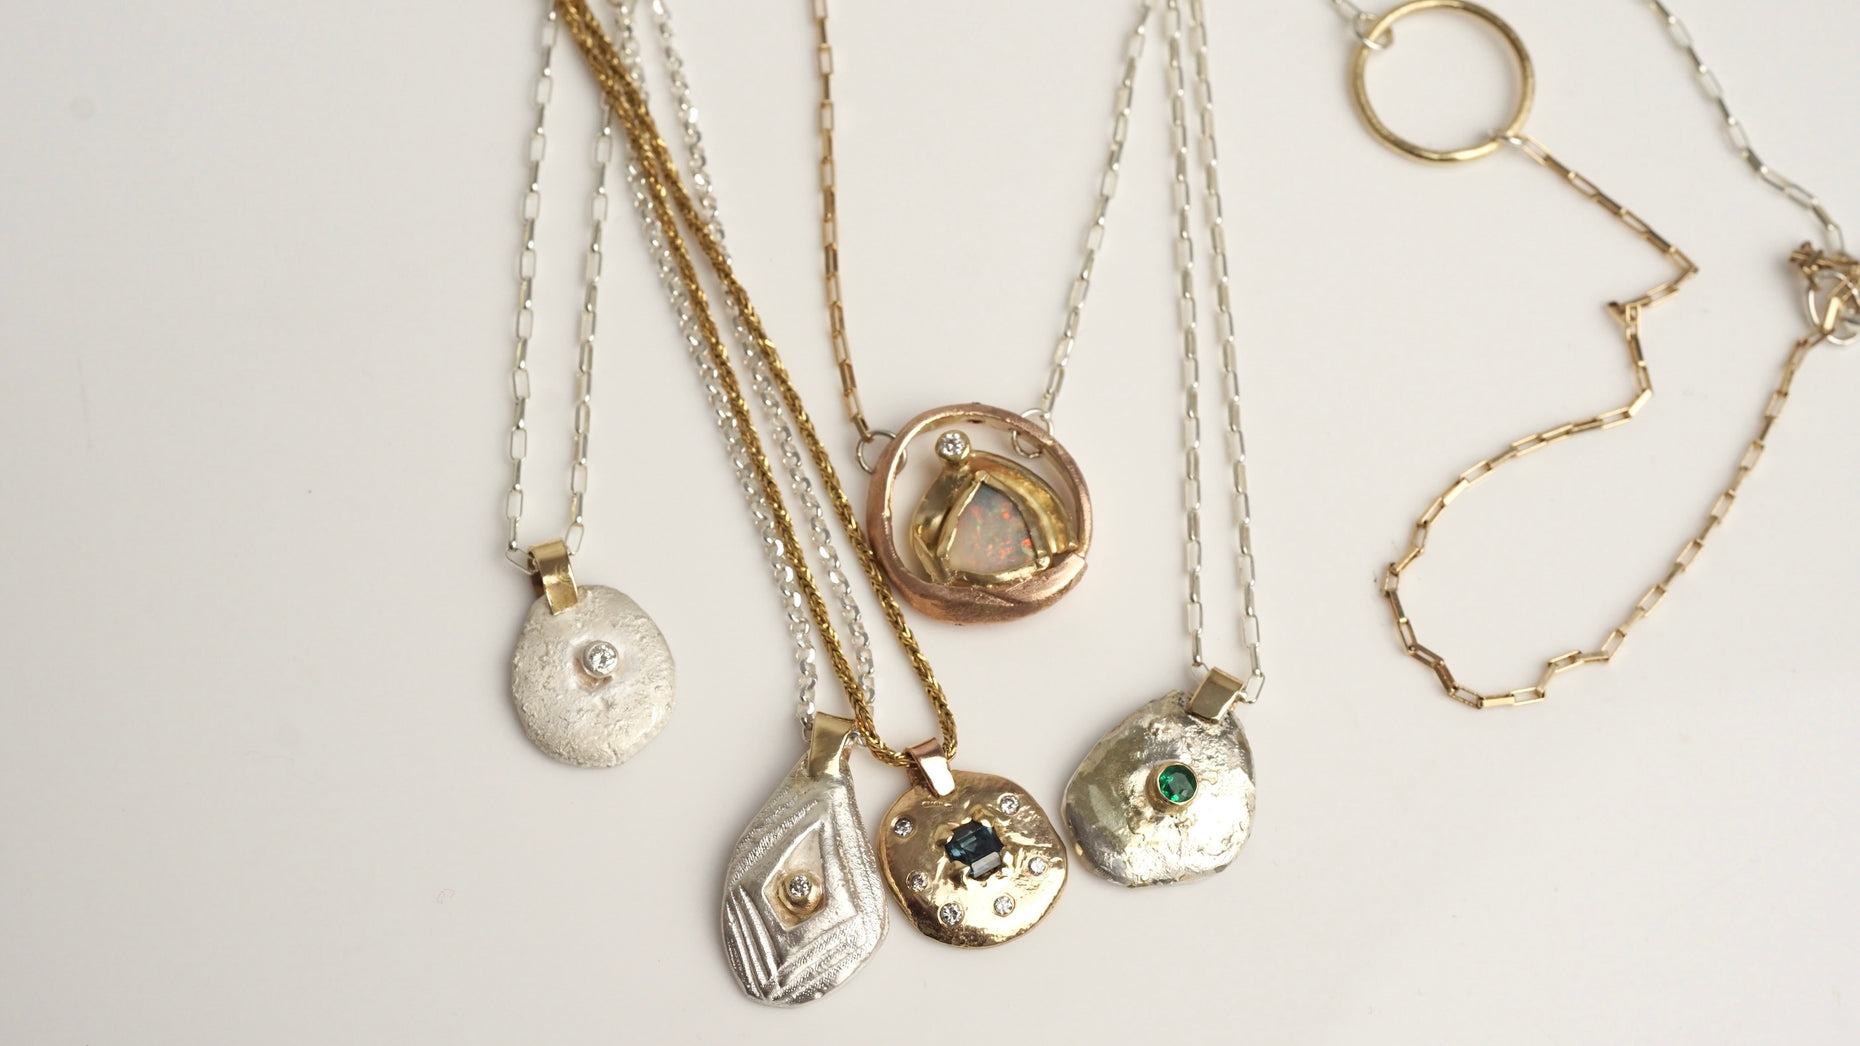 Ethically Handcrafted Jewelry By Lindsay Walker | Walker Jewelry